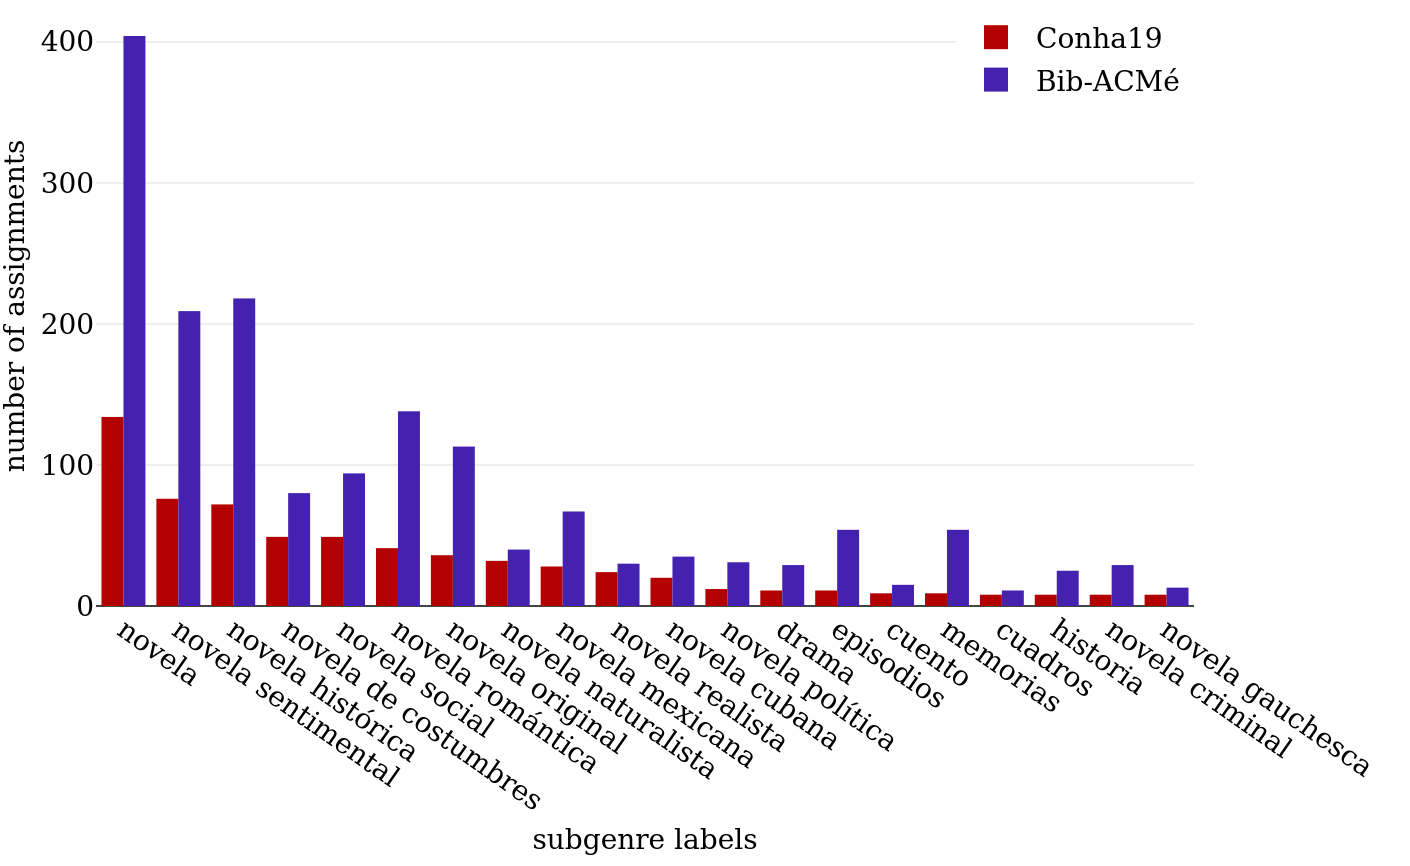 Top 20 most frequent subgenre signals in the corpus.